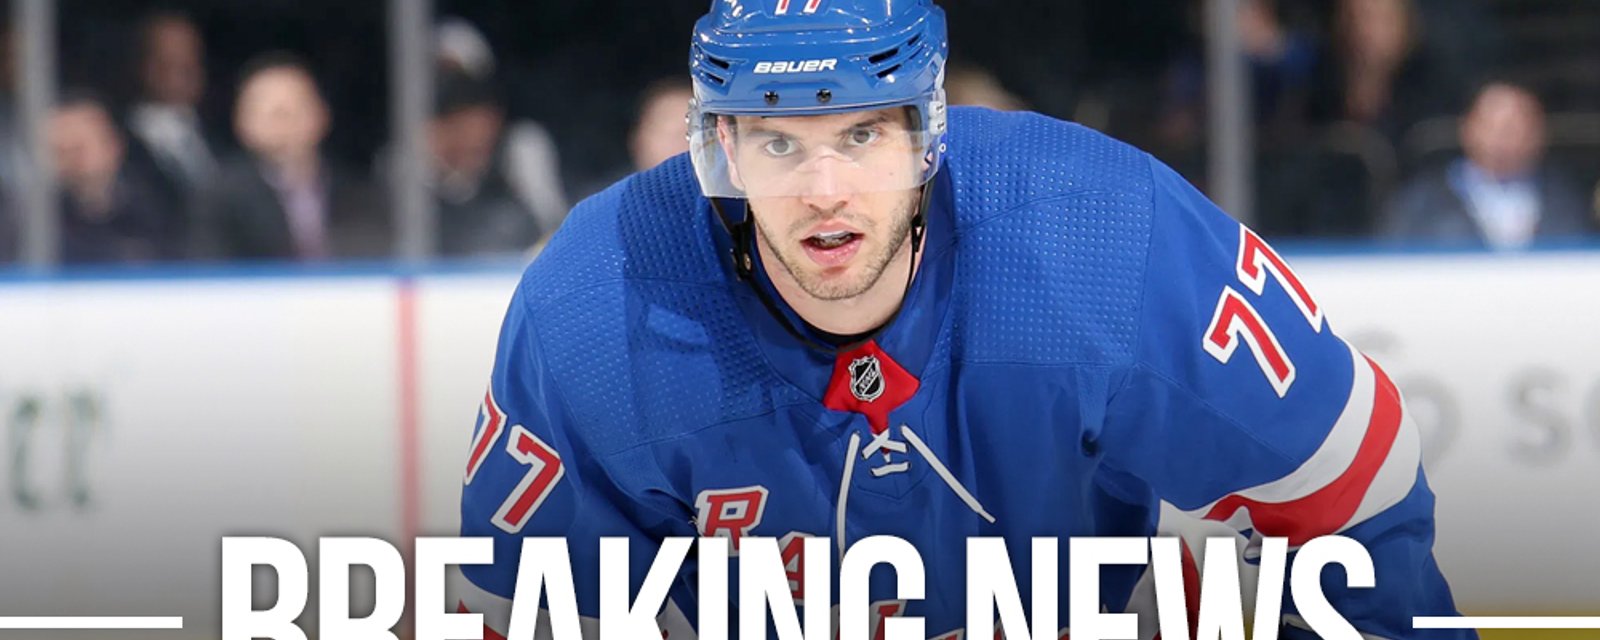 Rangers reportedly sign DeAngelo to short term deal